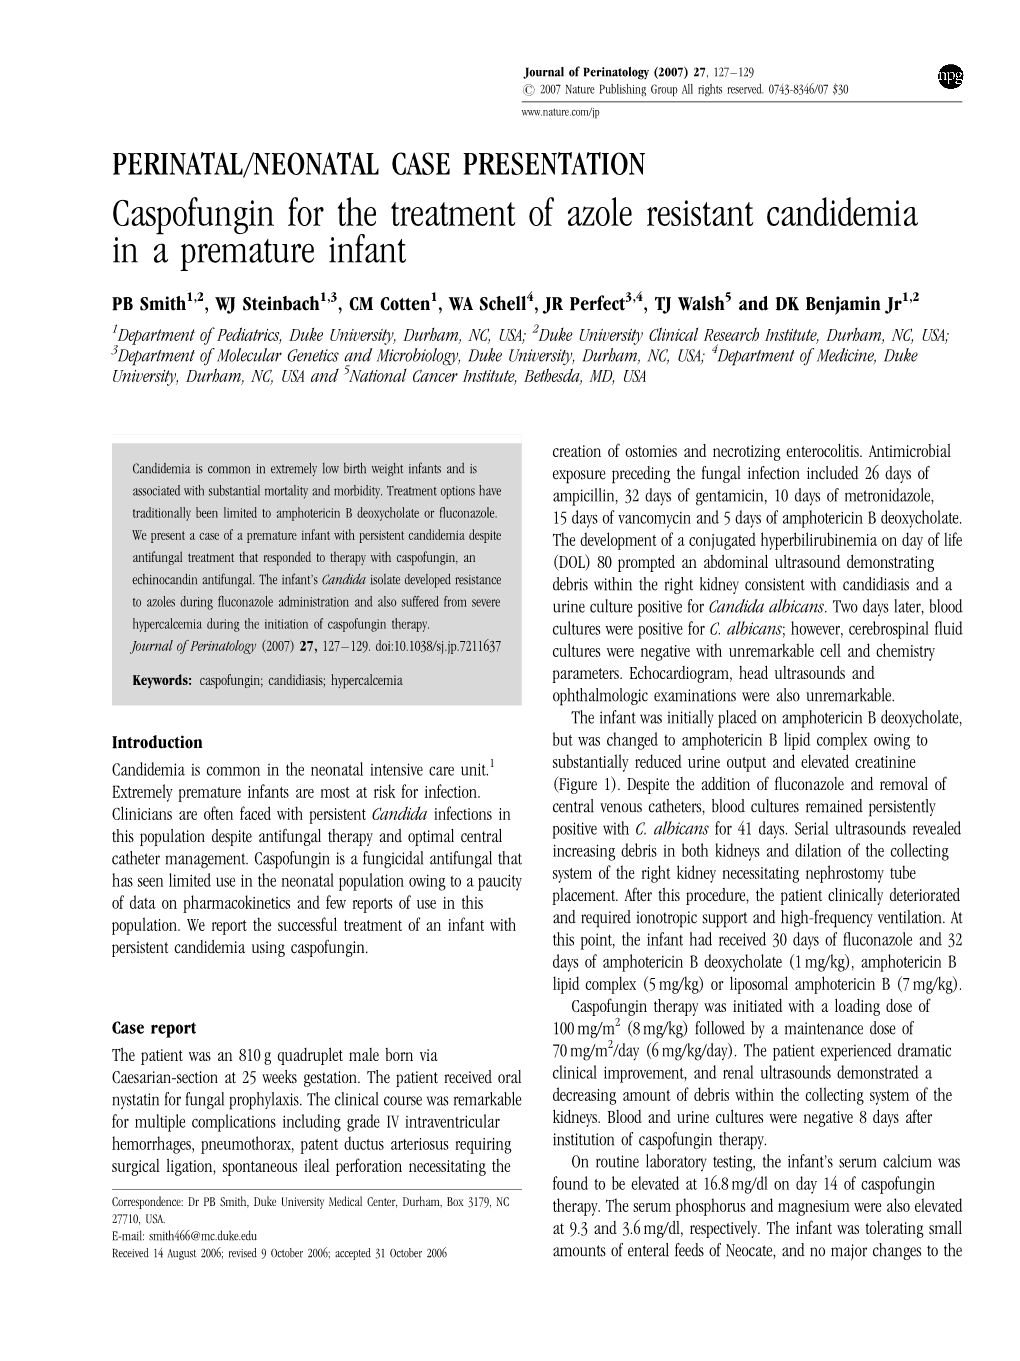 Caspofungin for the Treatment of Azole Resistant Candidemia in a Premature Infant